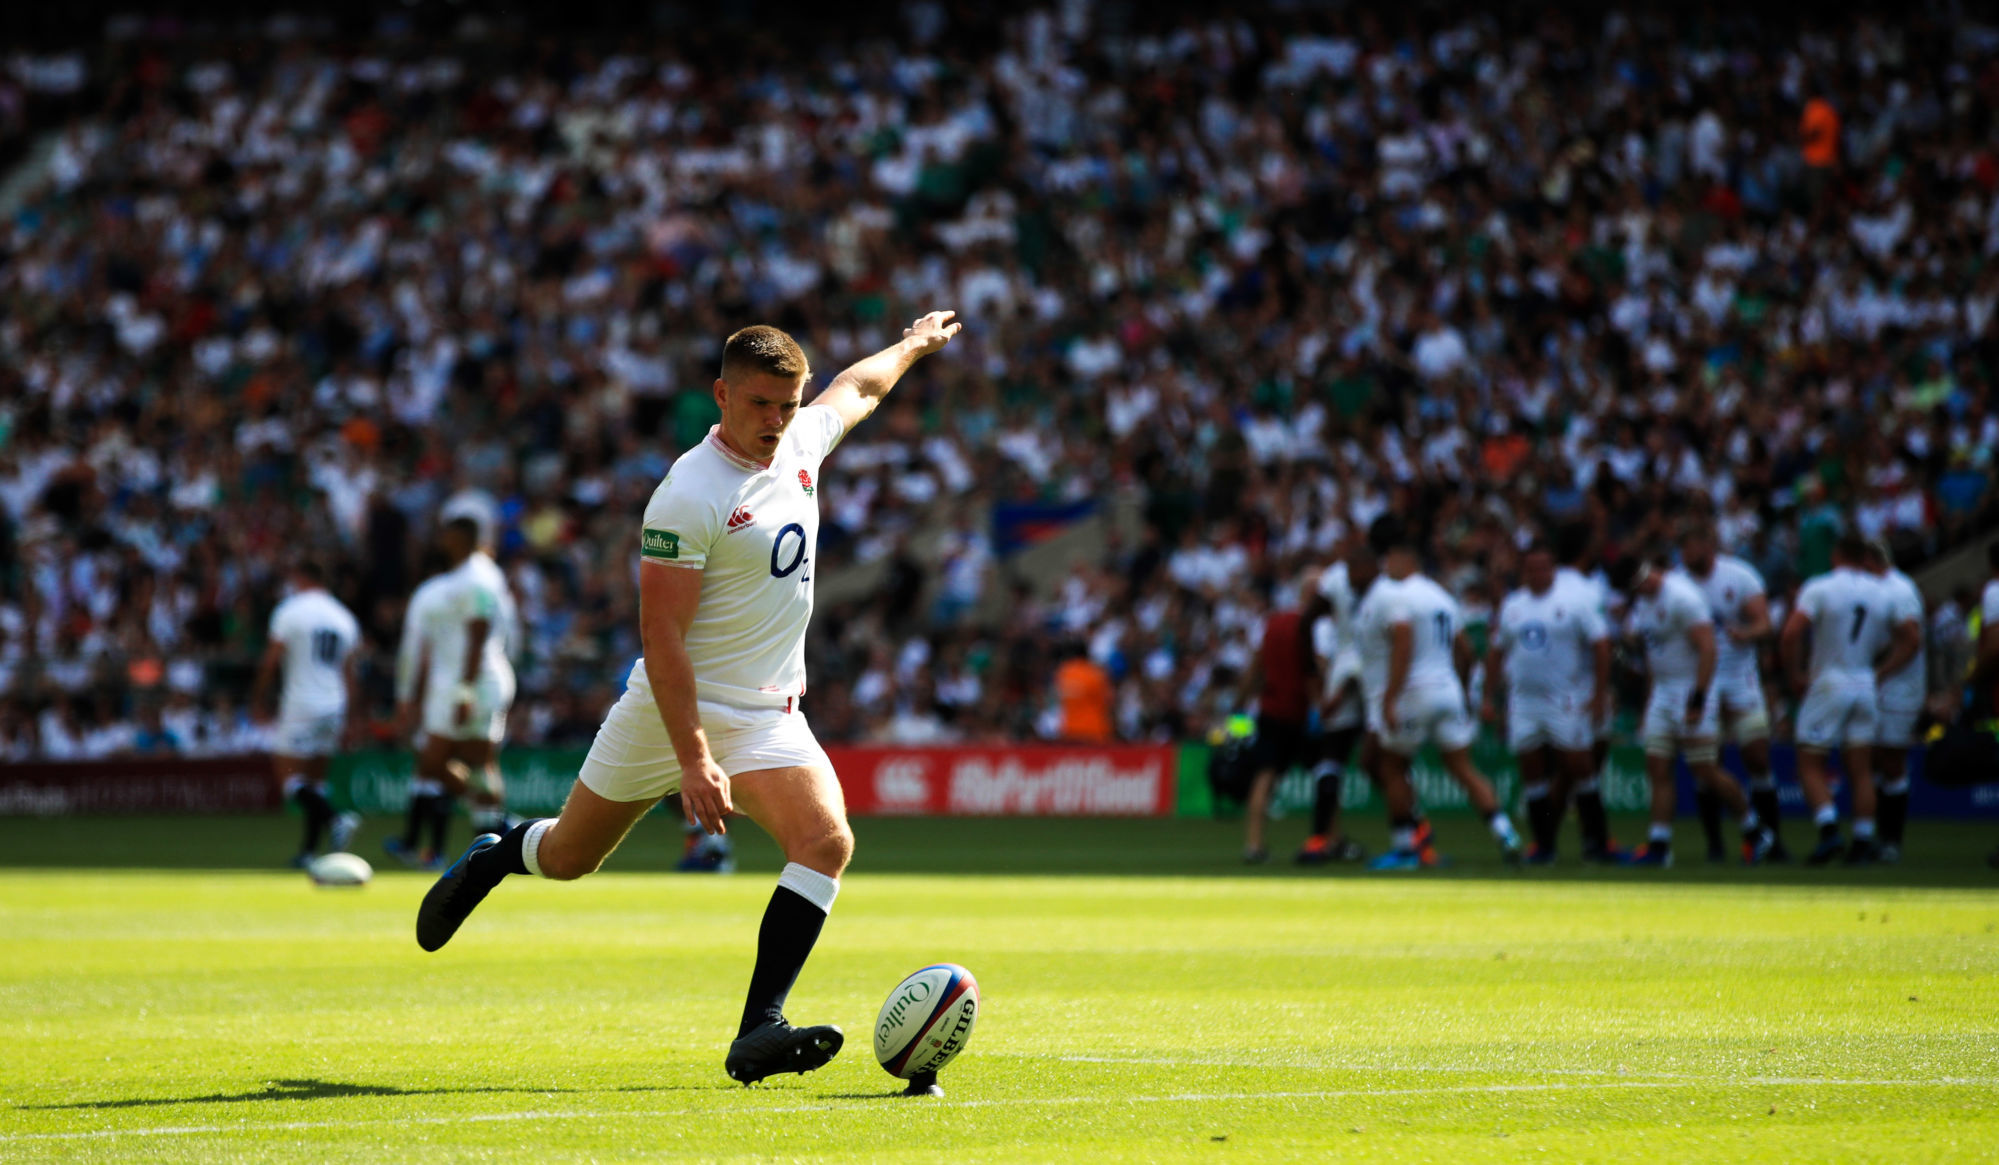 Owen Farrell - XV d'Angleterre. Photo : PA Images / Icon Sport